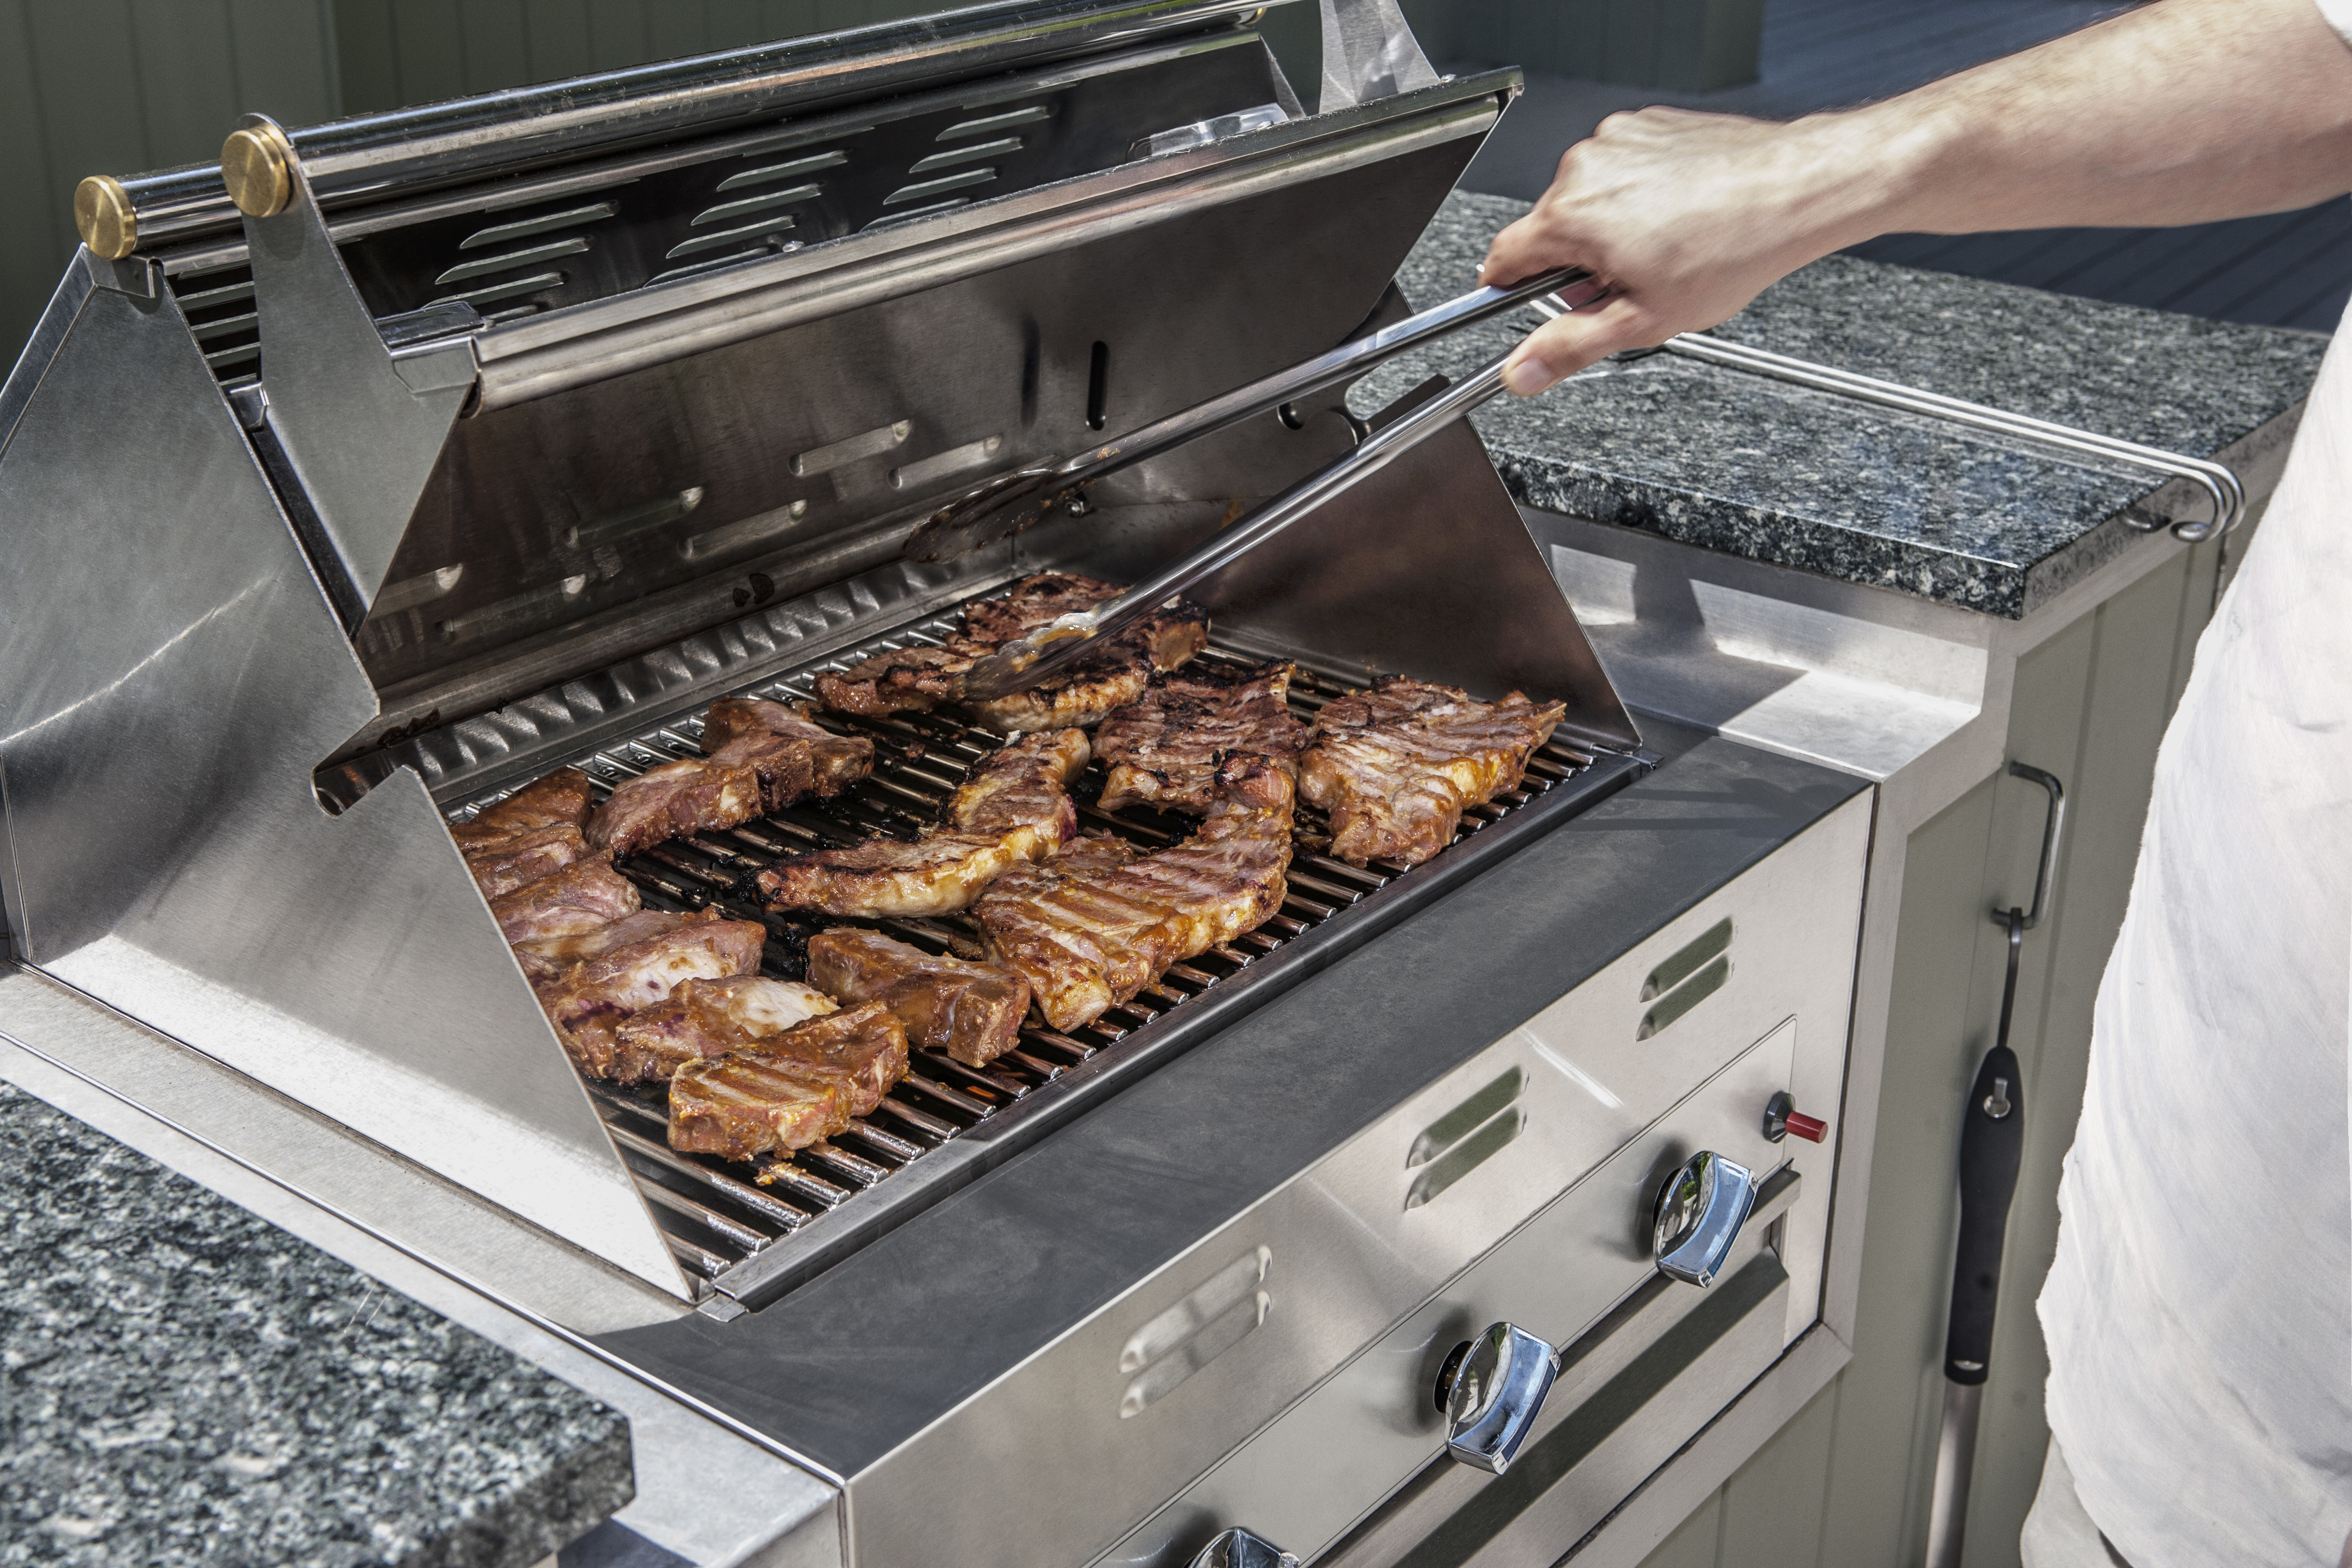 Should You Use Foil in a Gas Grill?